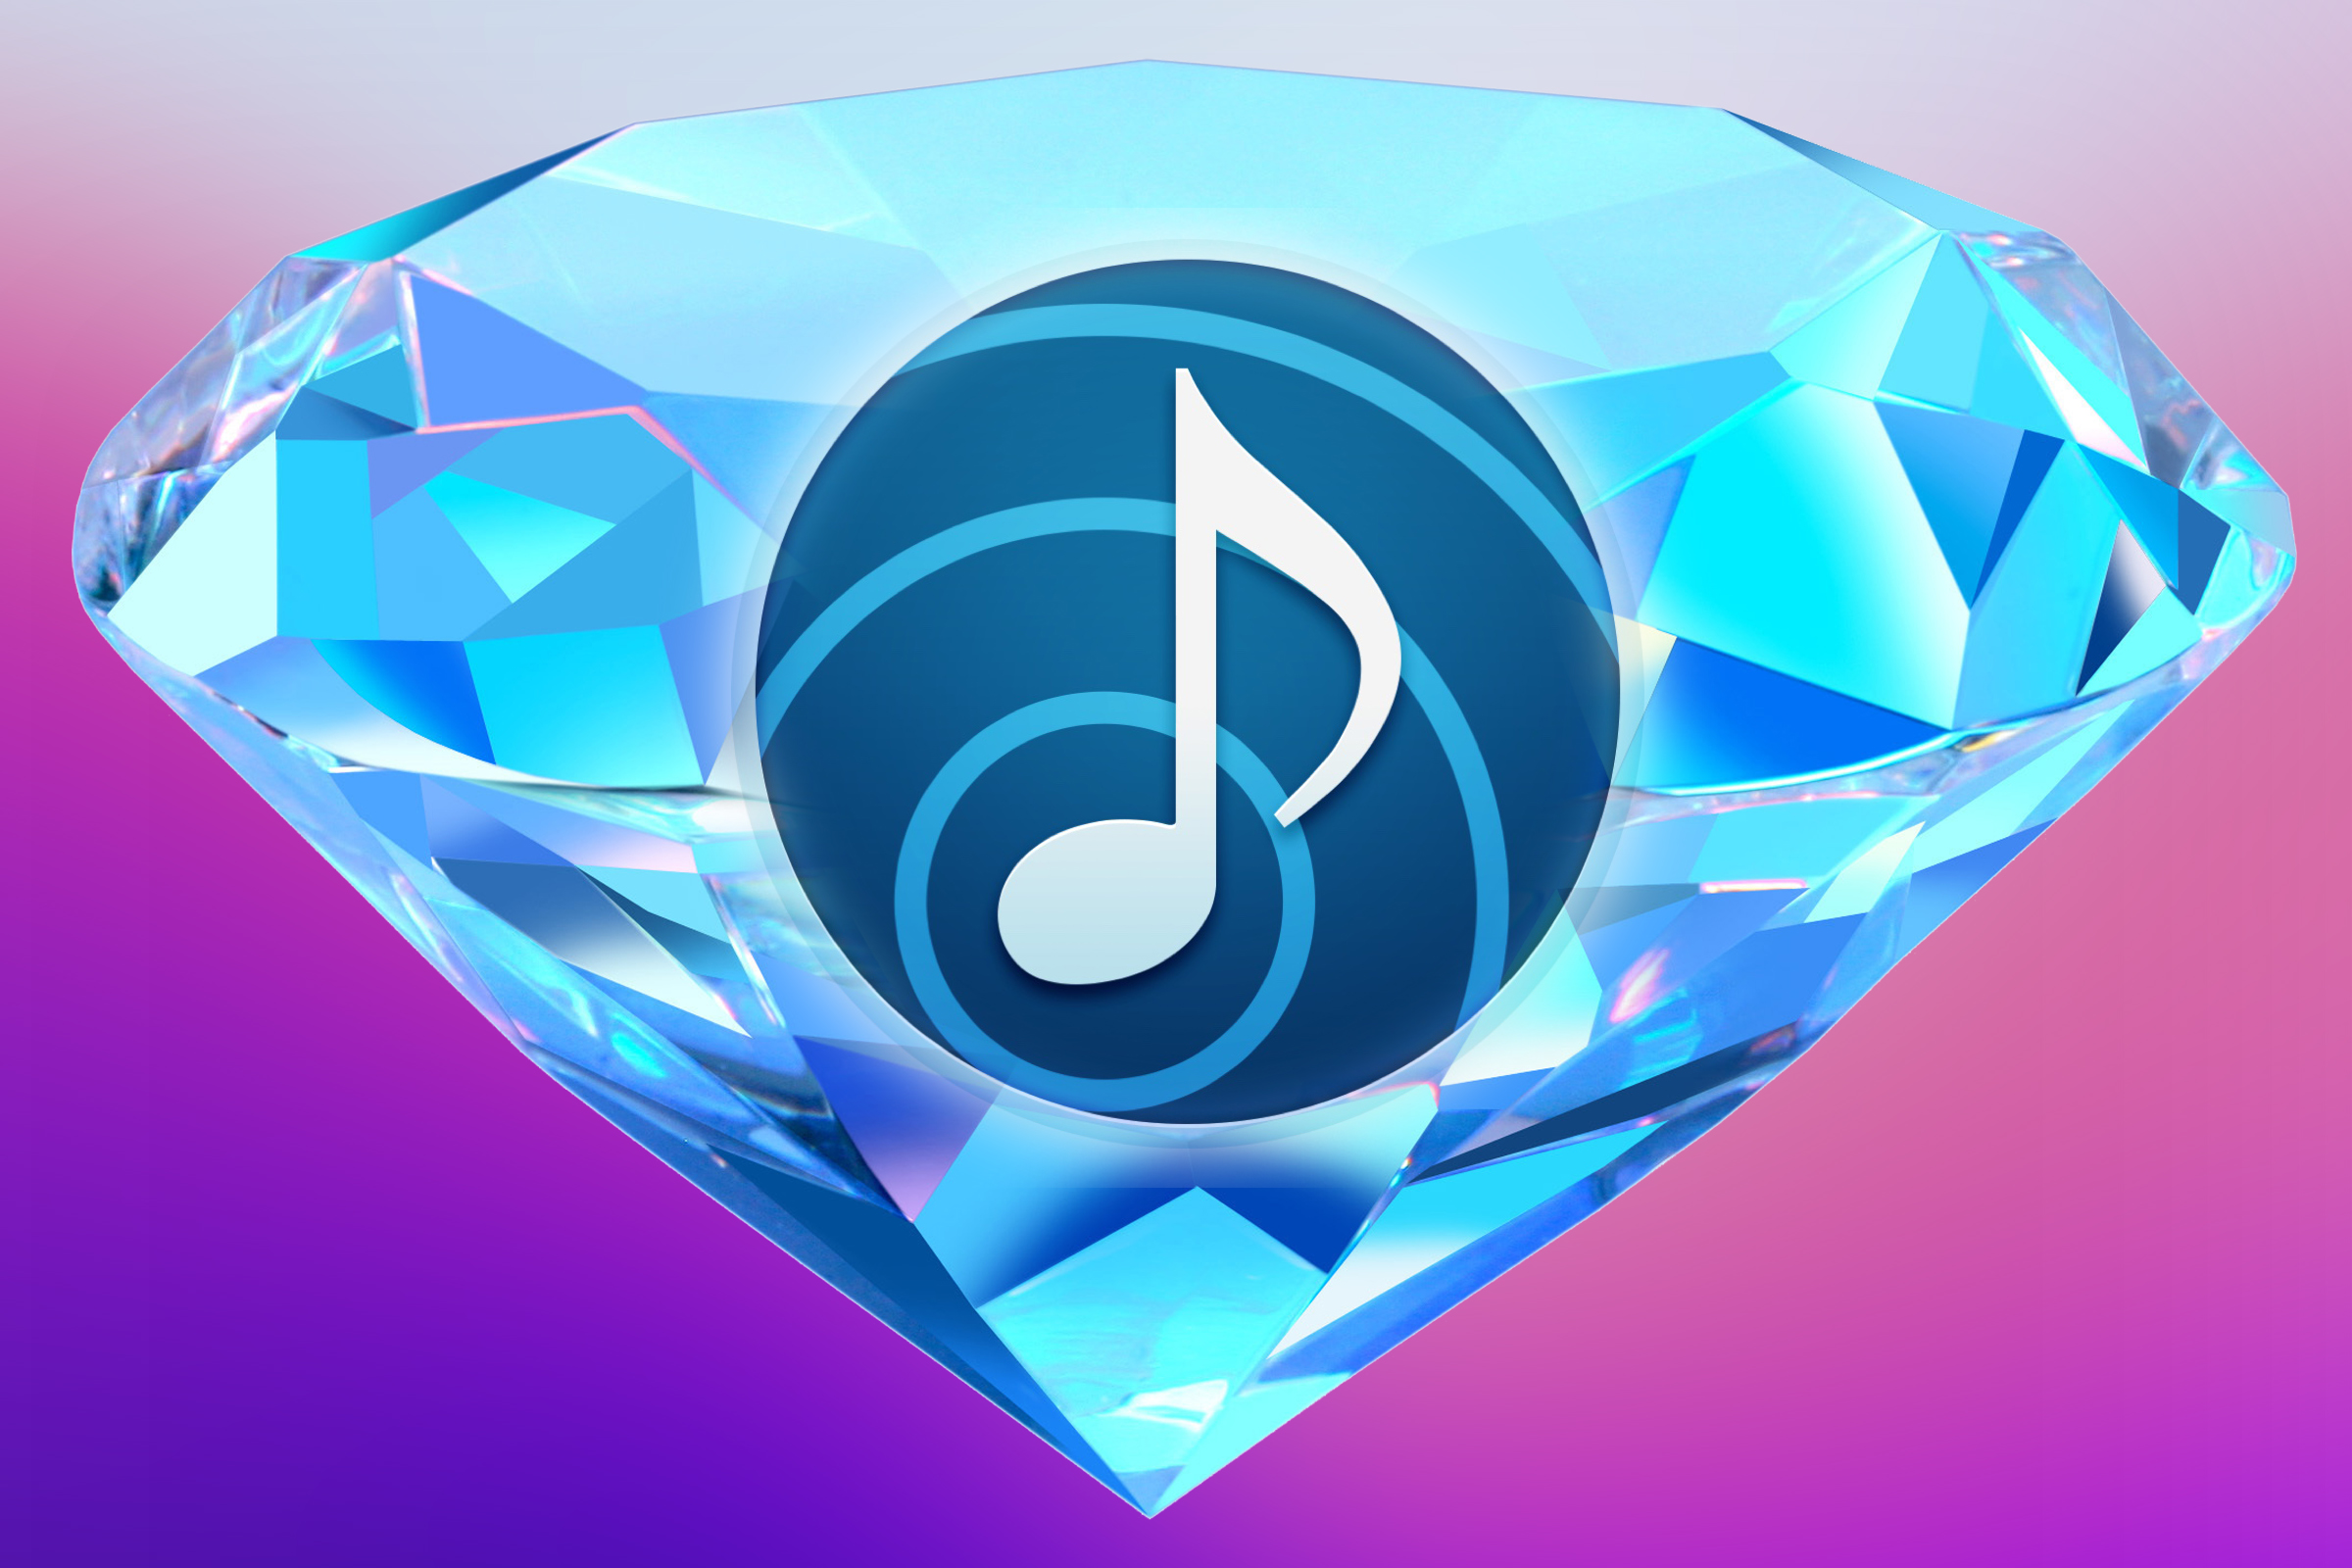 Airfoil review: Sheer delight in streaming audio to any device